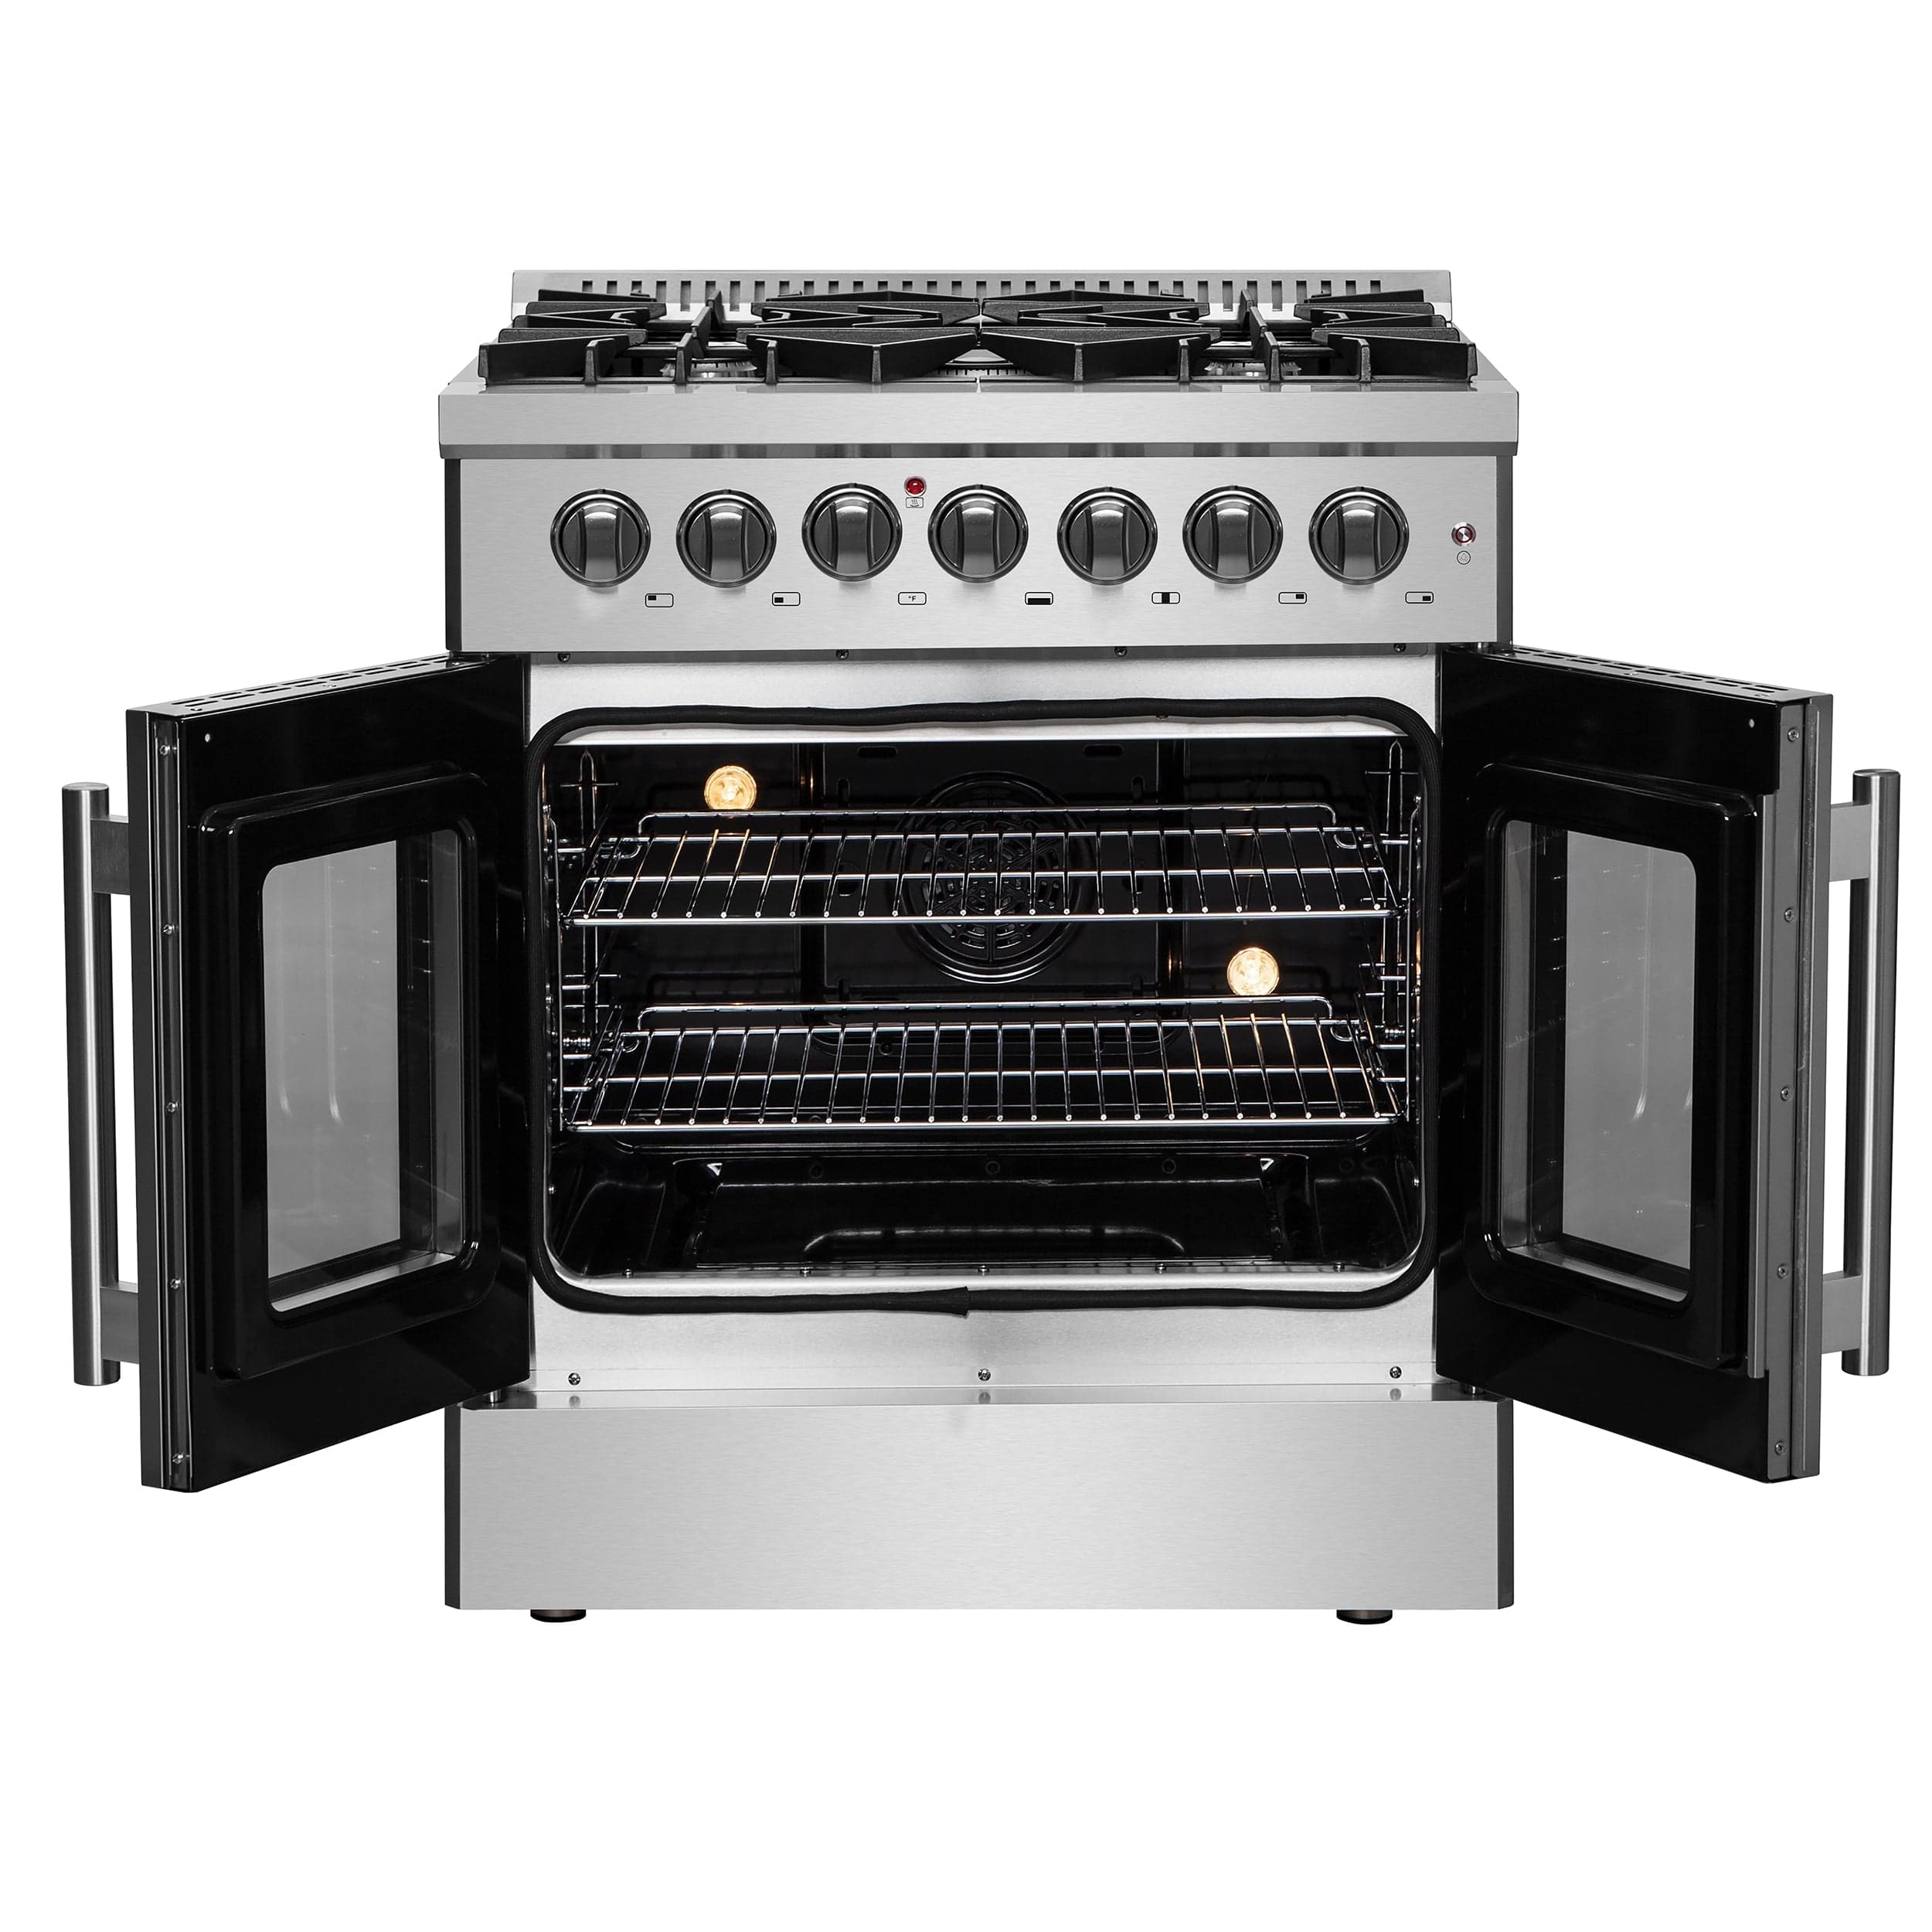 Forno Galiano 30" Gas Burner, Electric Oven Range With French Door in Stainless Steel, FFSGS6356-30 Ranges FFSGS6356-30 Luxury Appliances Direct